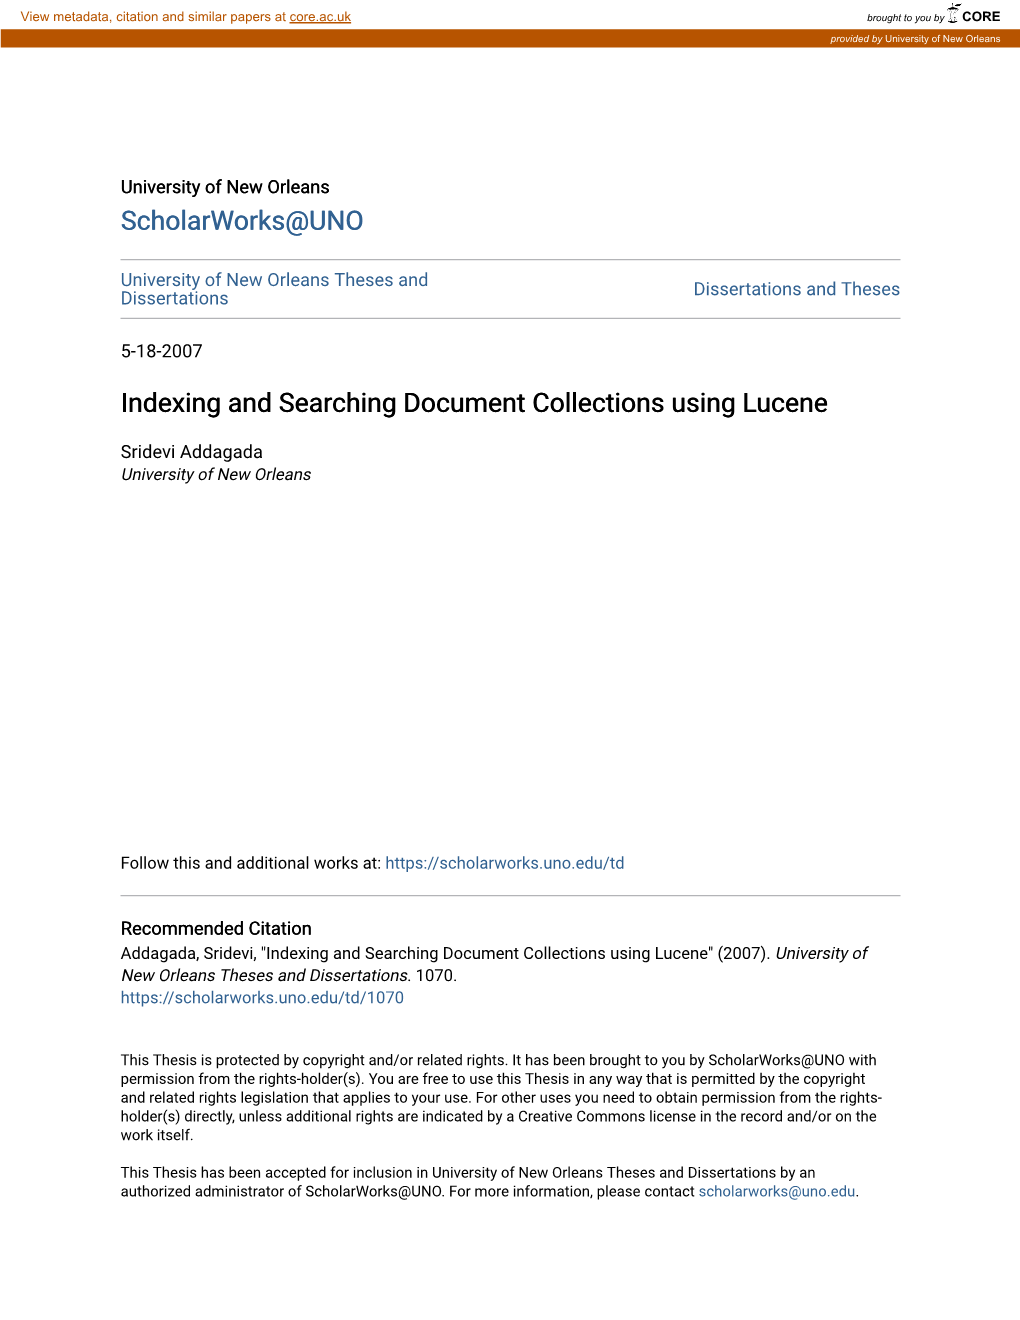 Indexing and Searching Document Collections Using Lucene